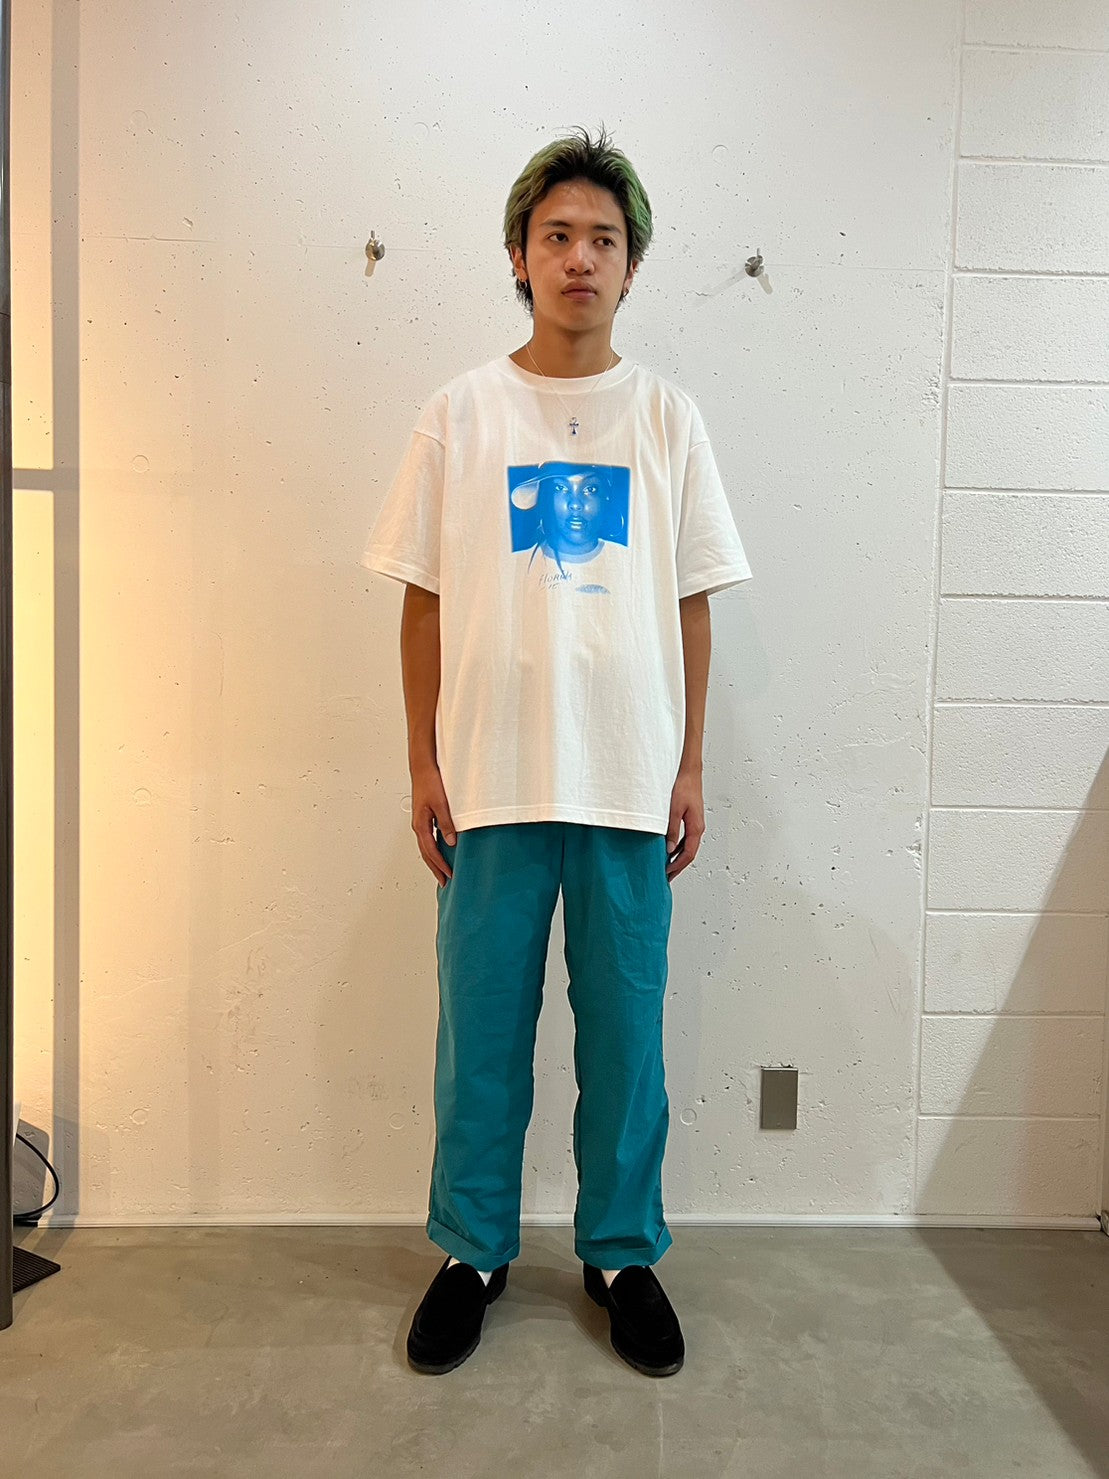 Frontin' Tee Tee(BLUE)/THROWBACK(スローバック)